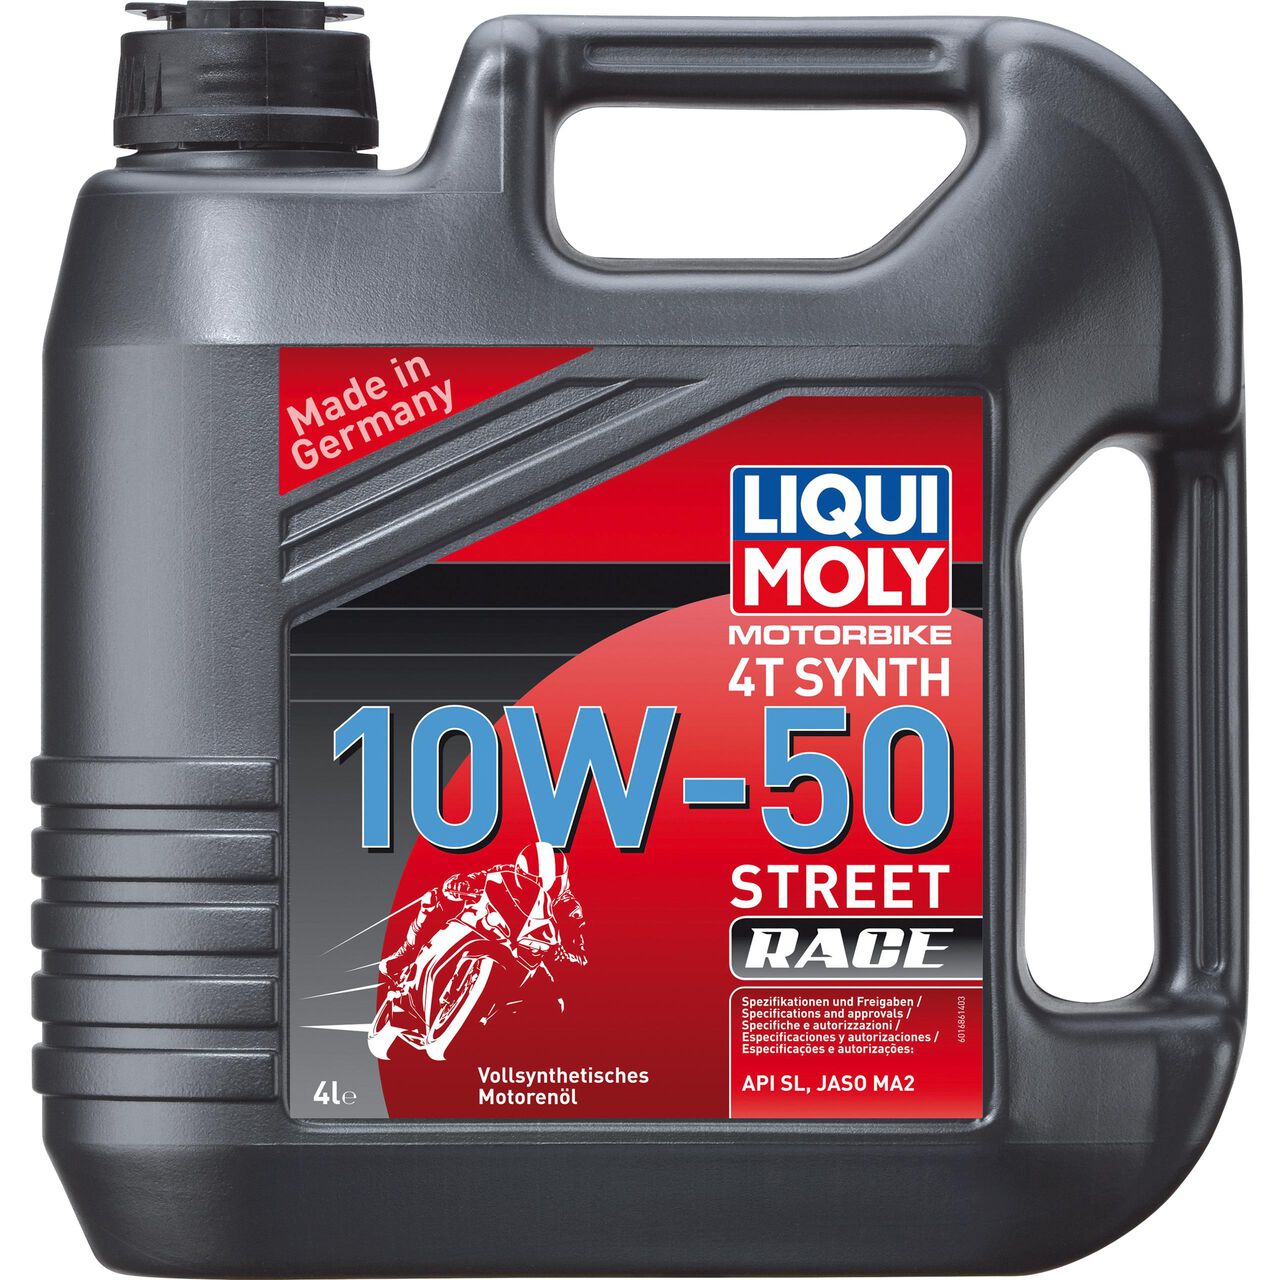 Liqui Moly Motorbike 4T additive Shooter Synthetic Blend Engine